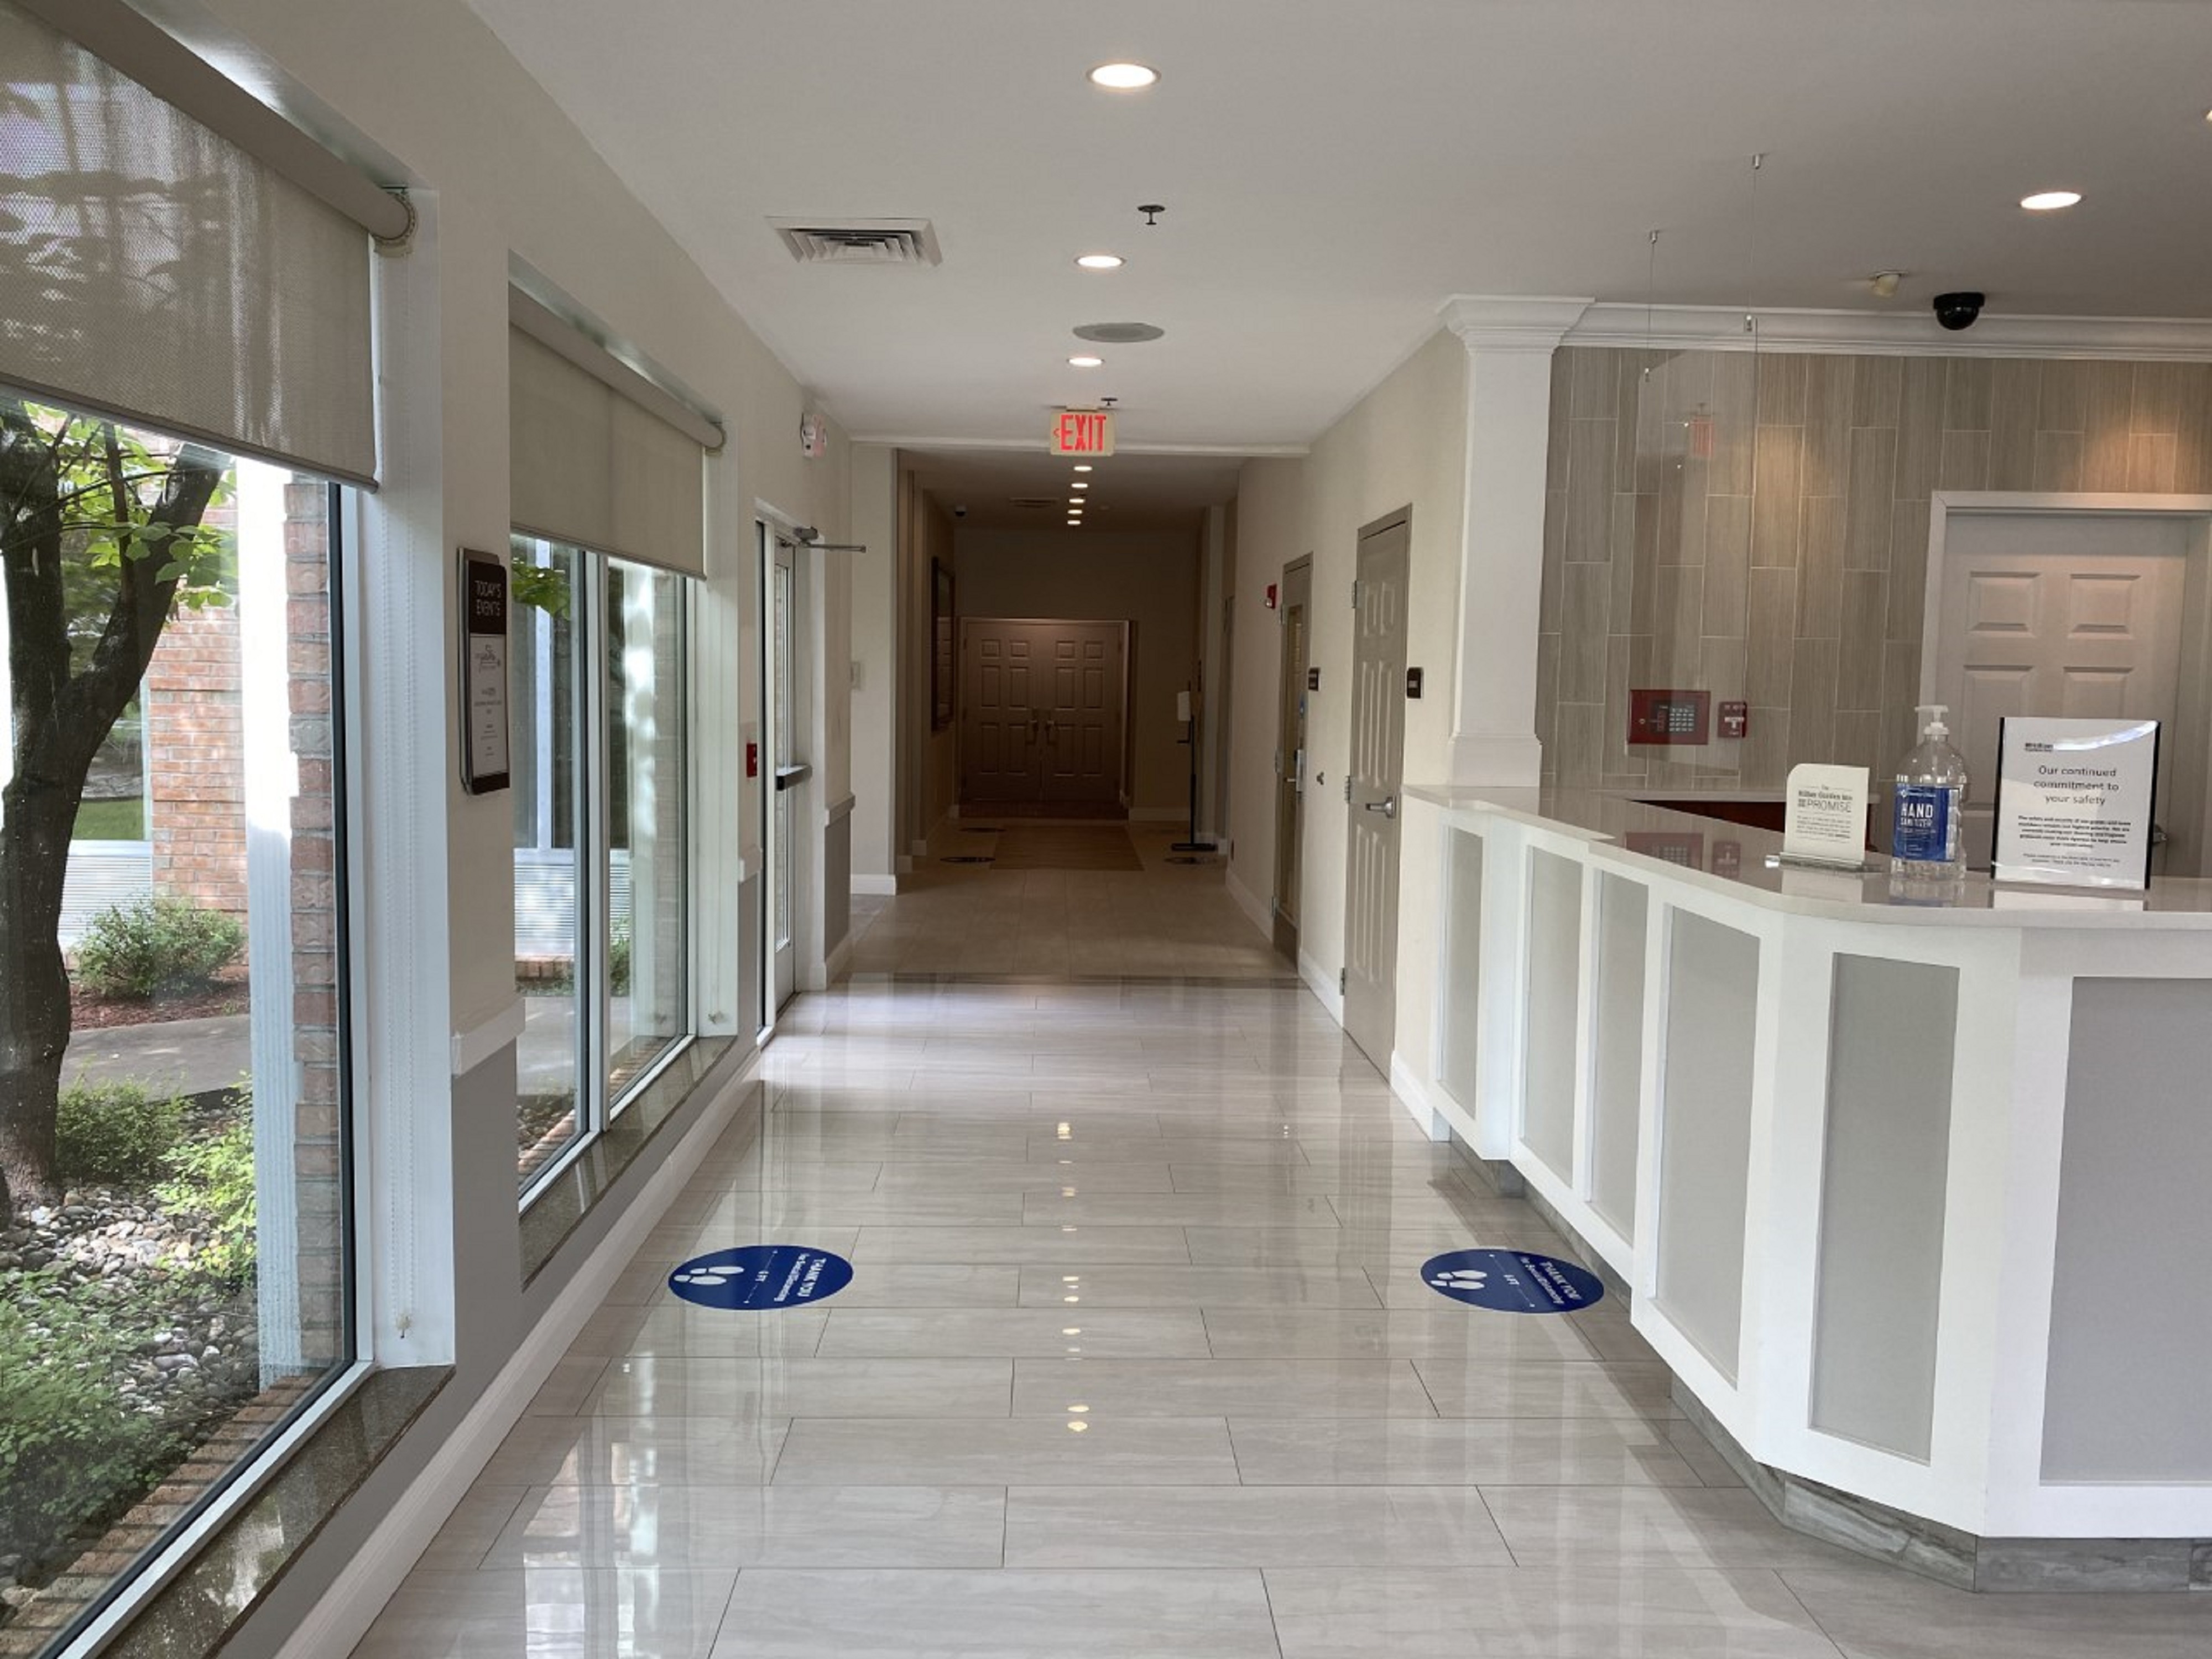 View of Hallway and Reception Desk Area